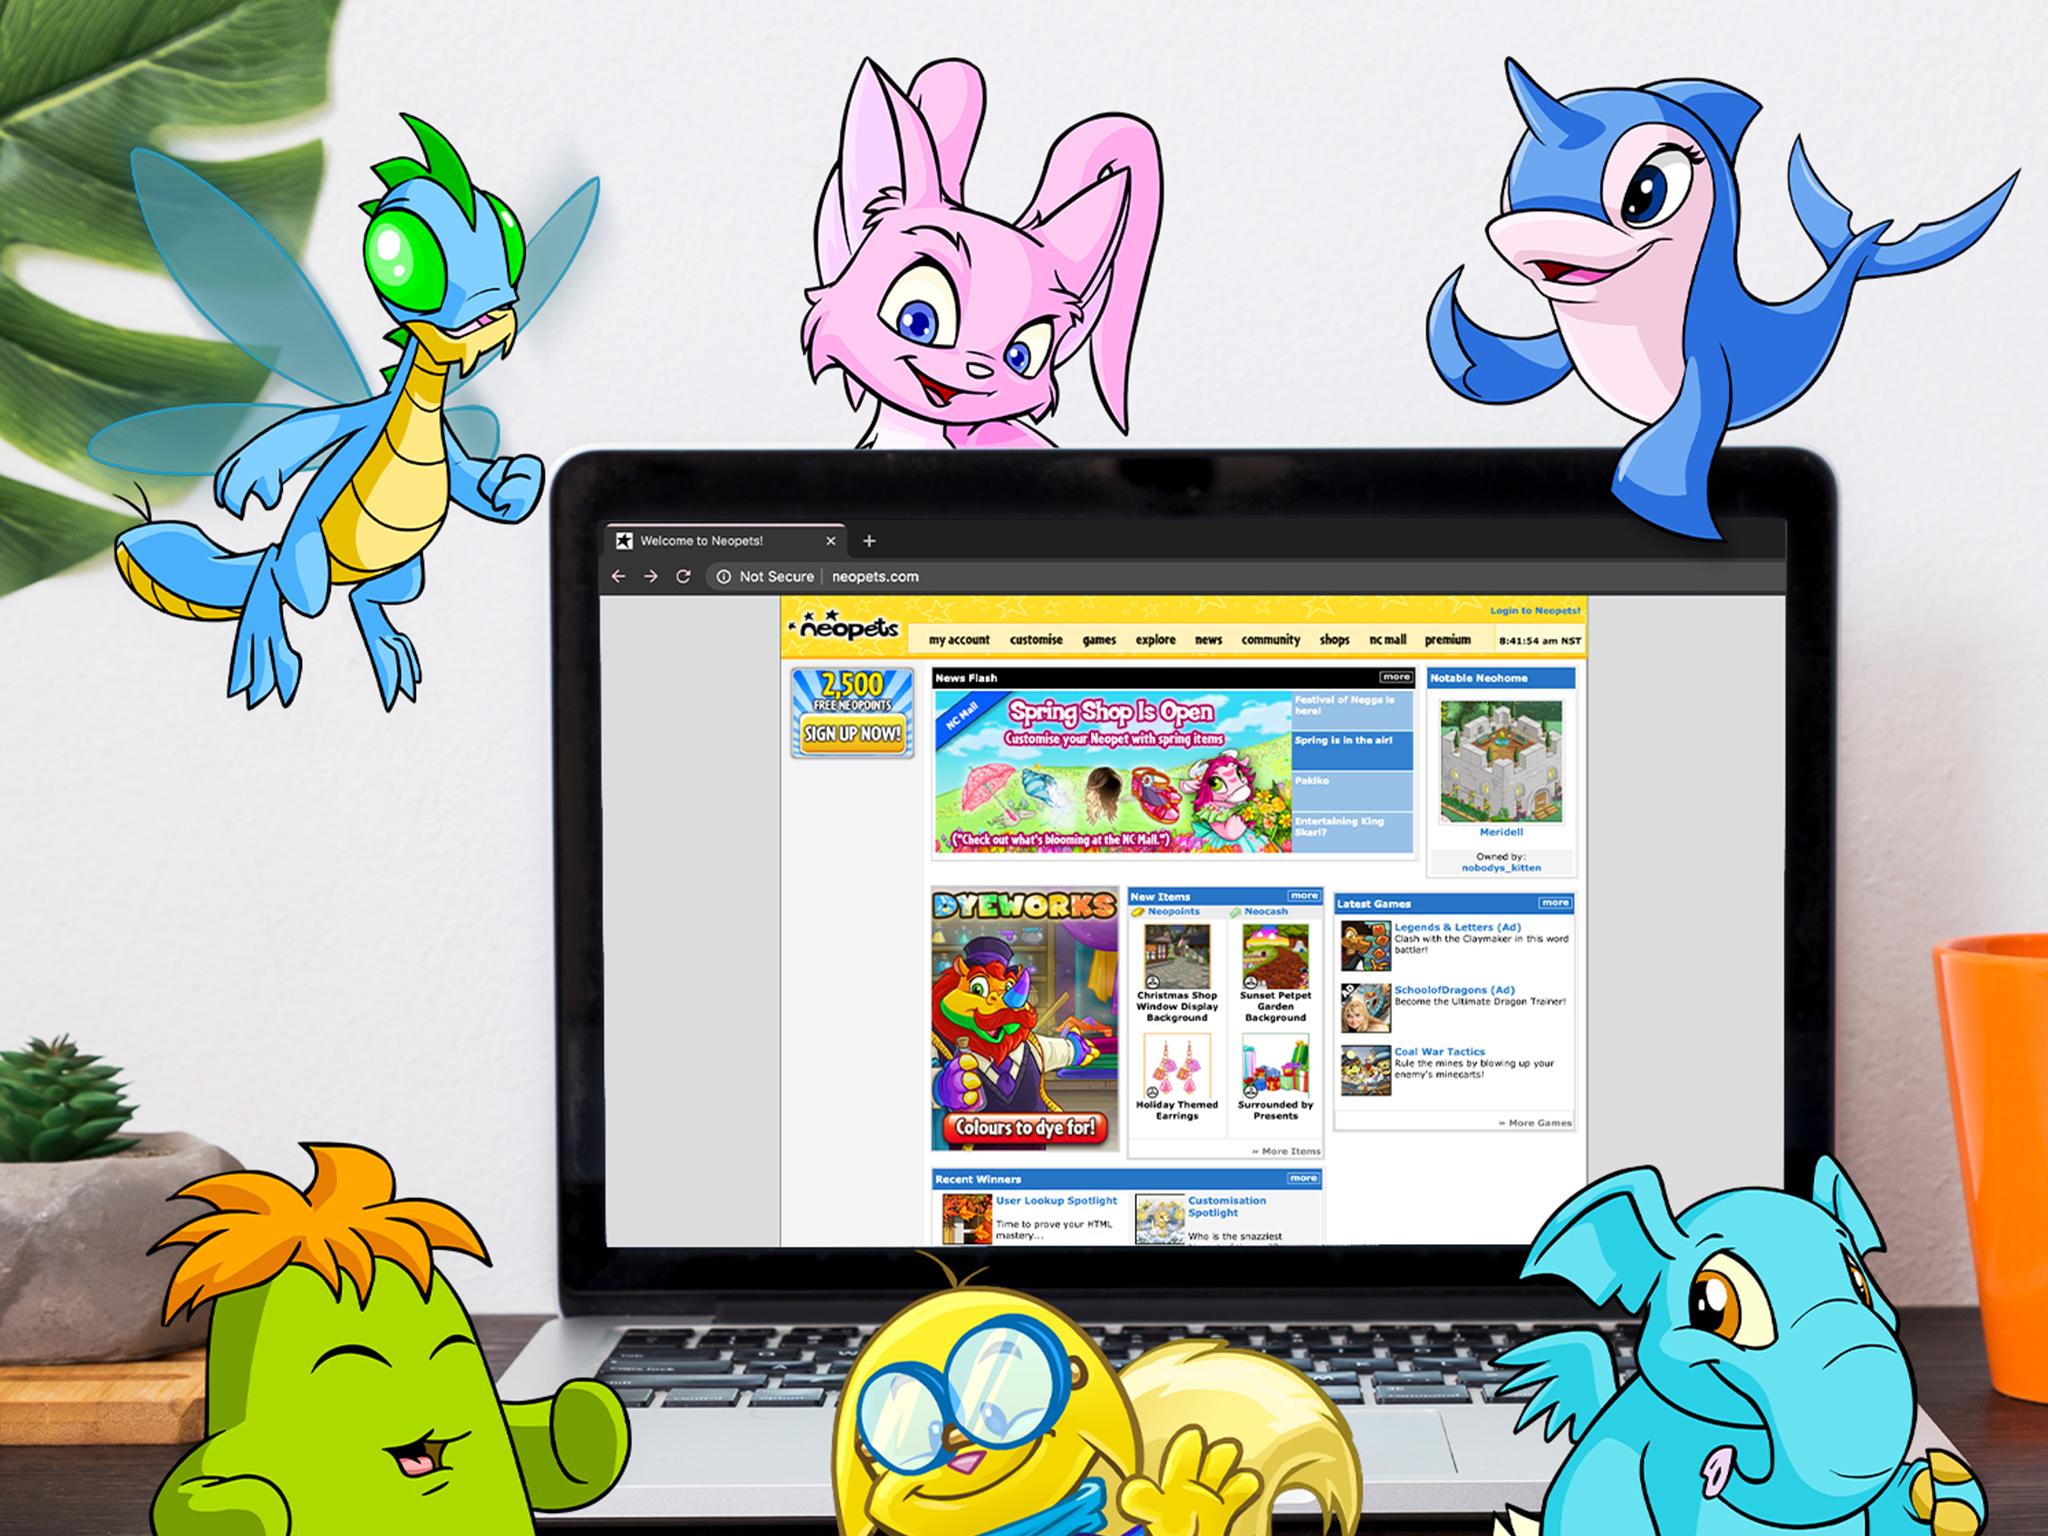 free online games like neopets